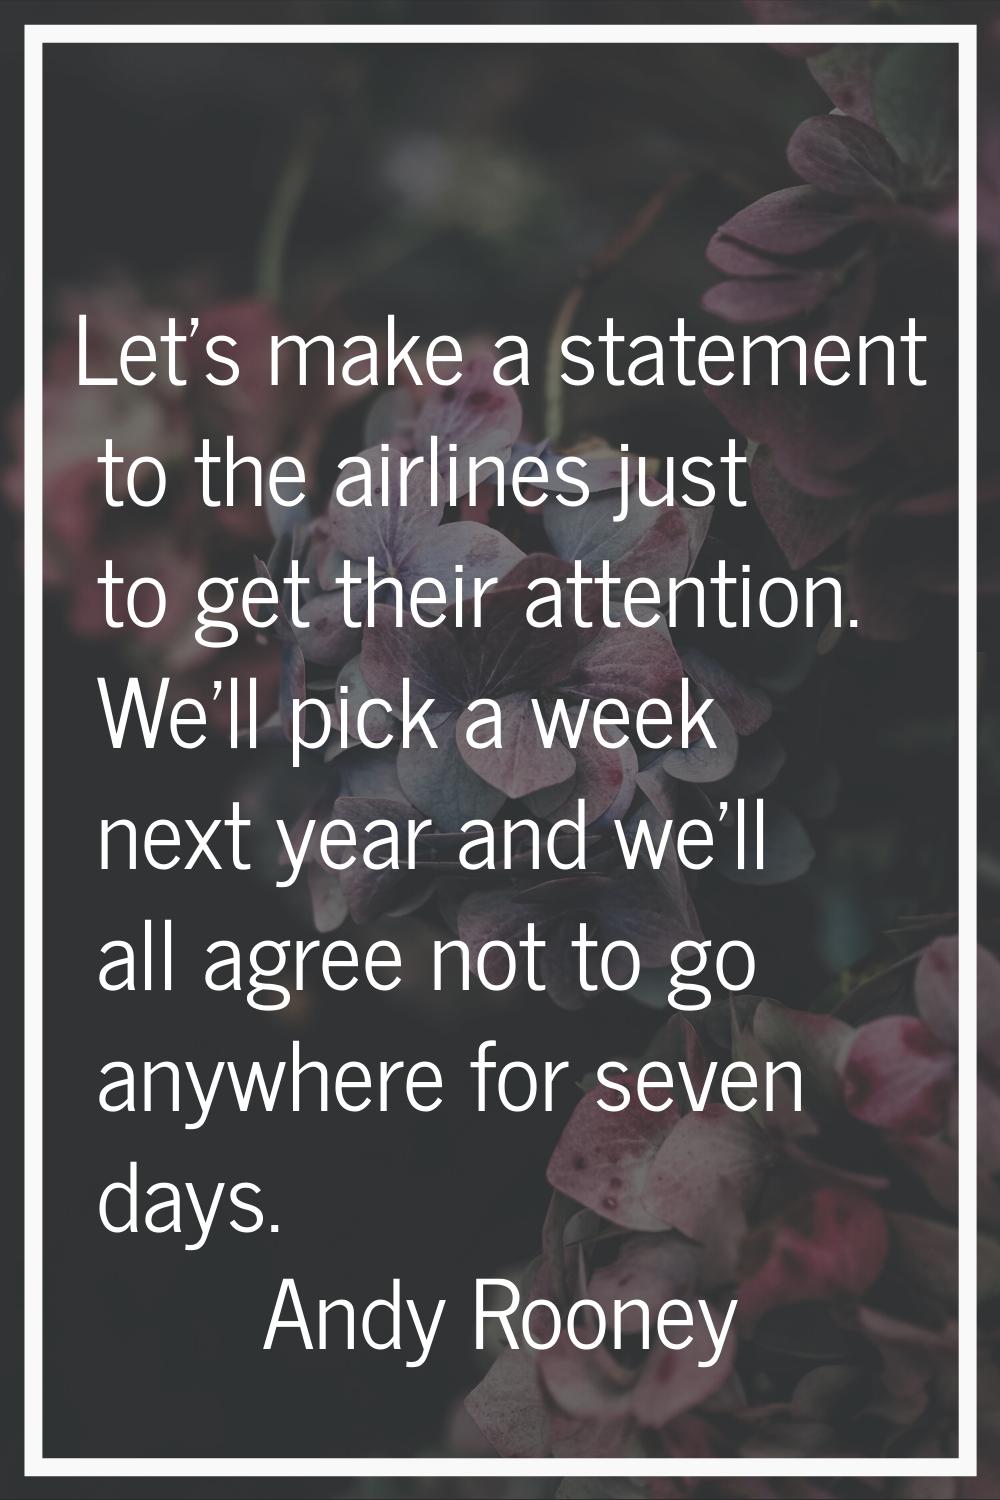 Let's make a statement to the airlines just to get their attention. We'll pick a week next year and